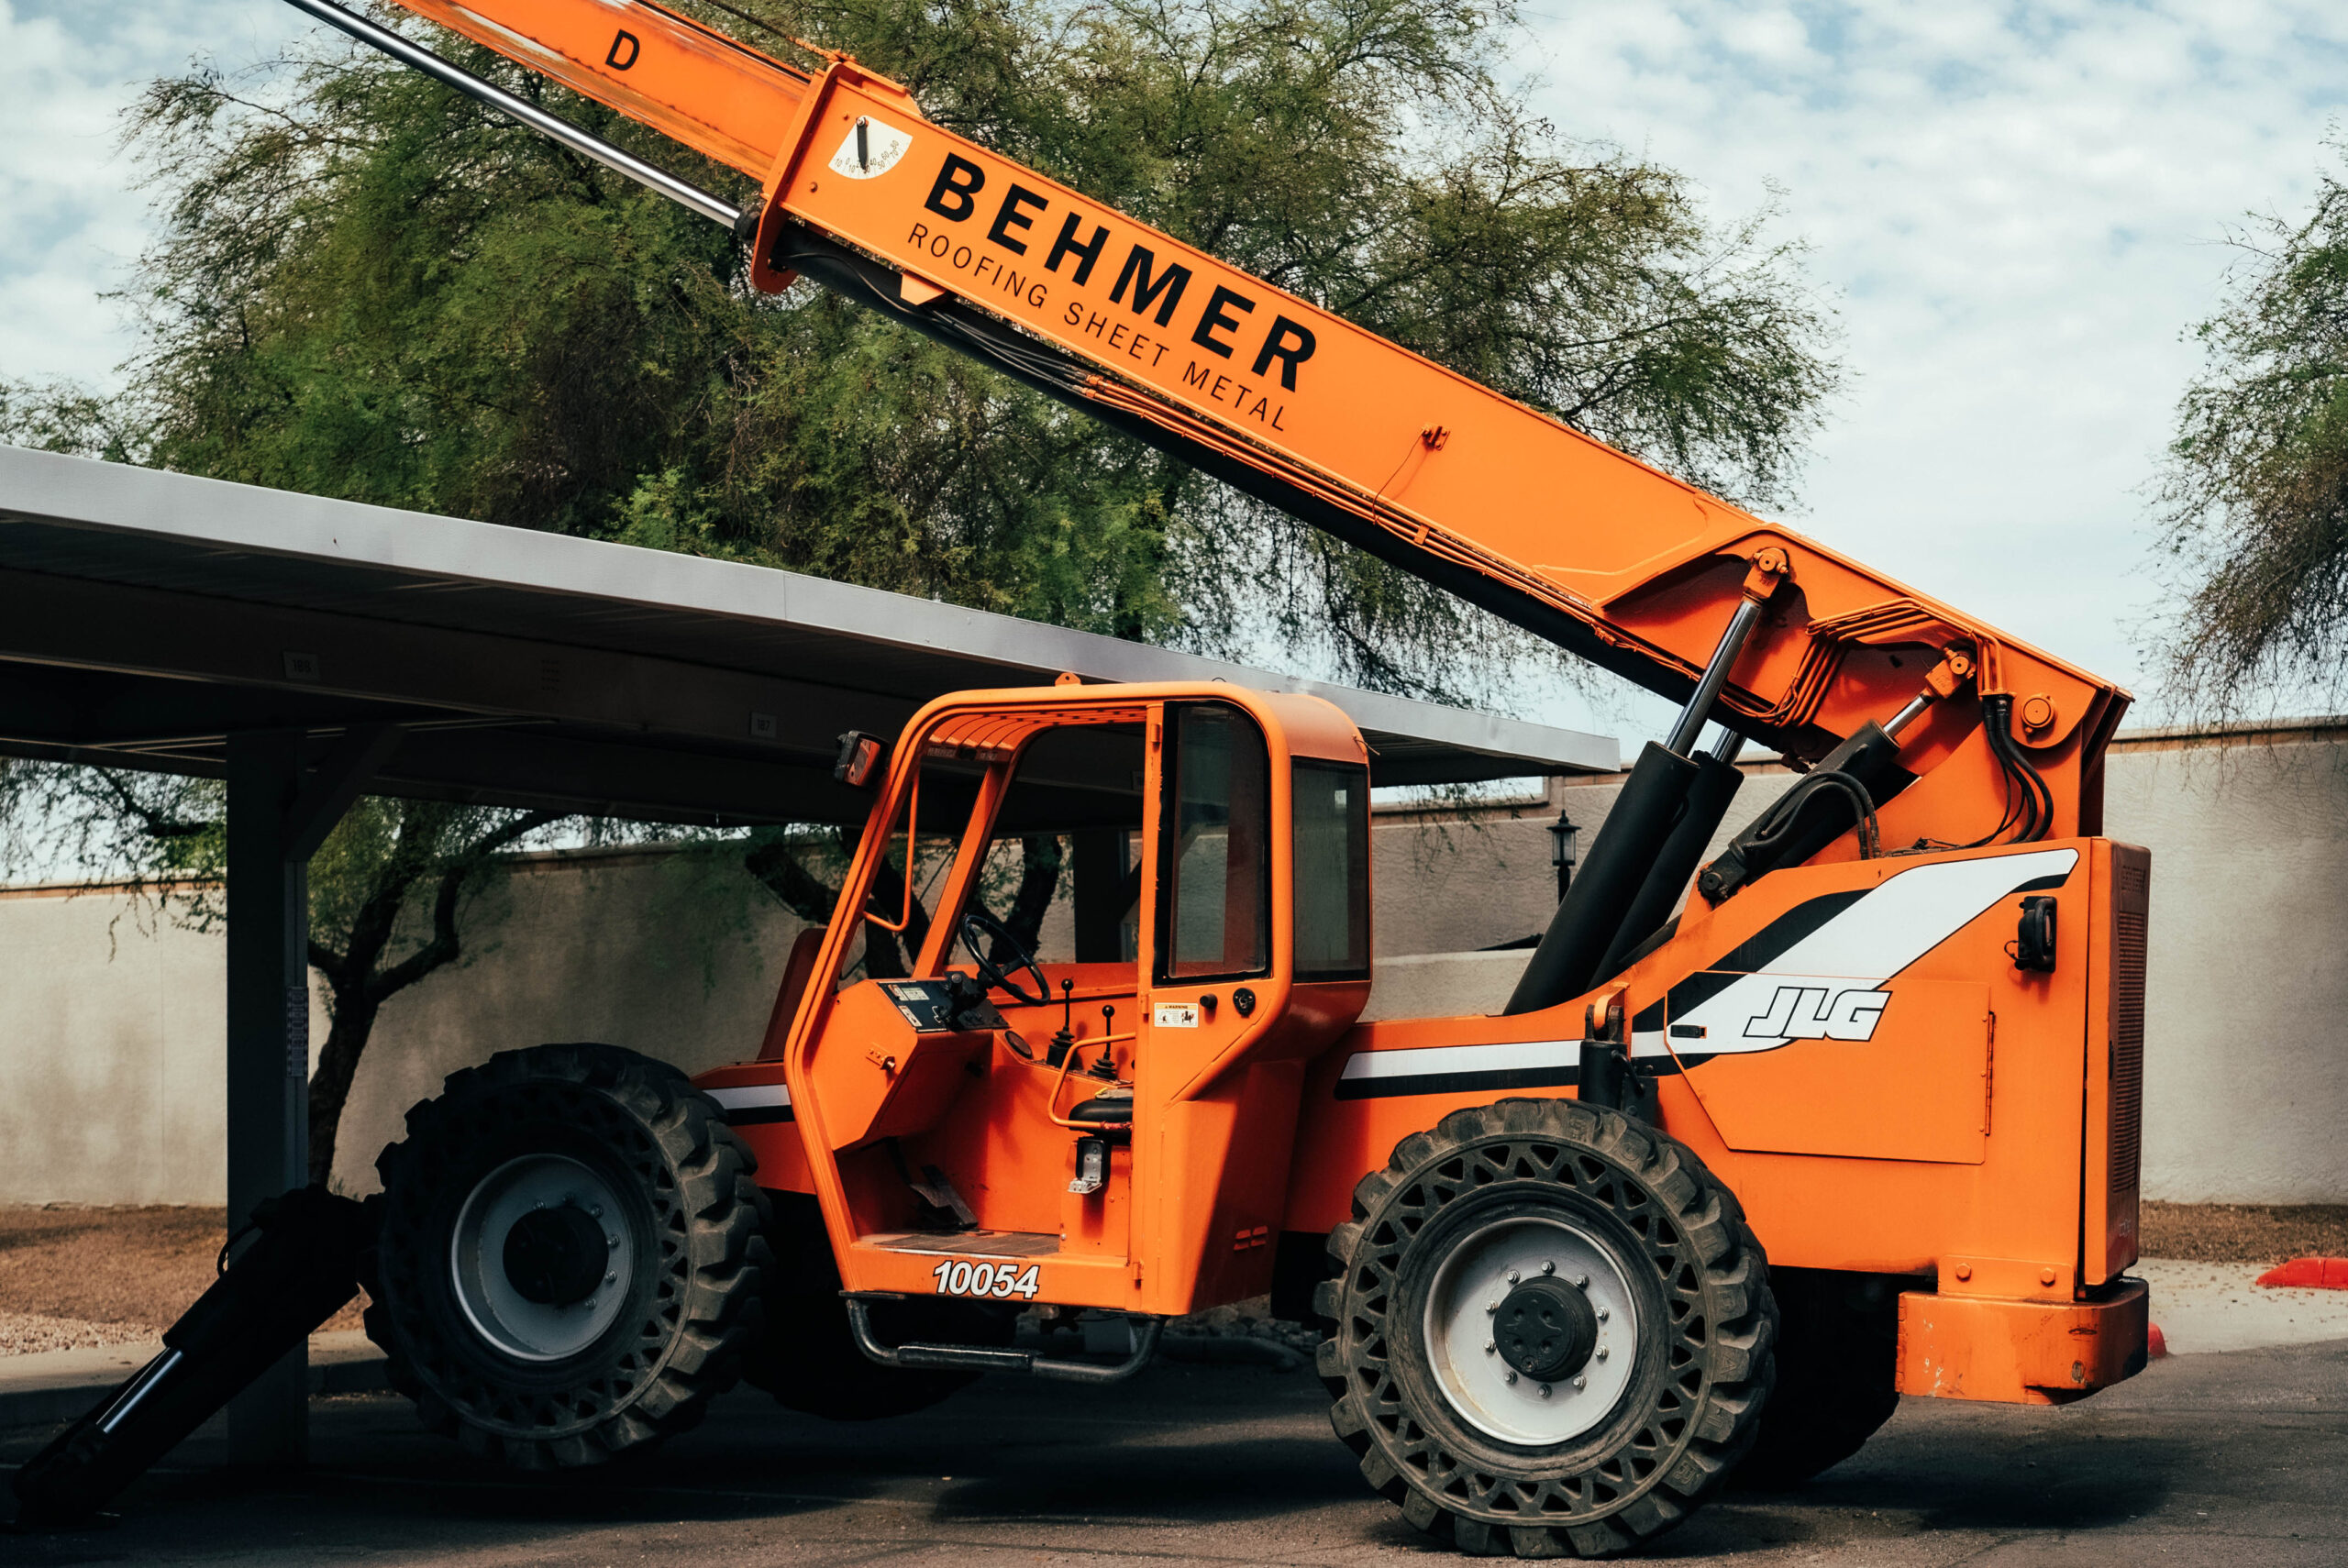 The Biltmore Area roofing contractor has parked a large orange crane in a parking lot.